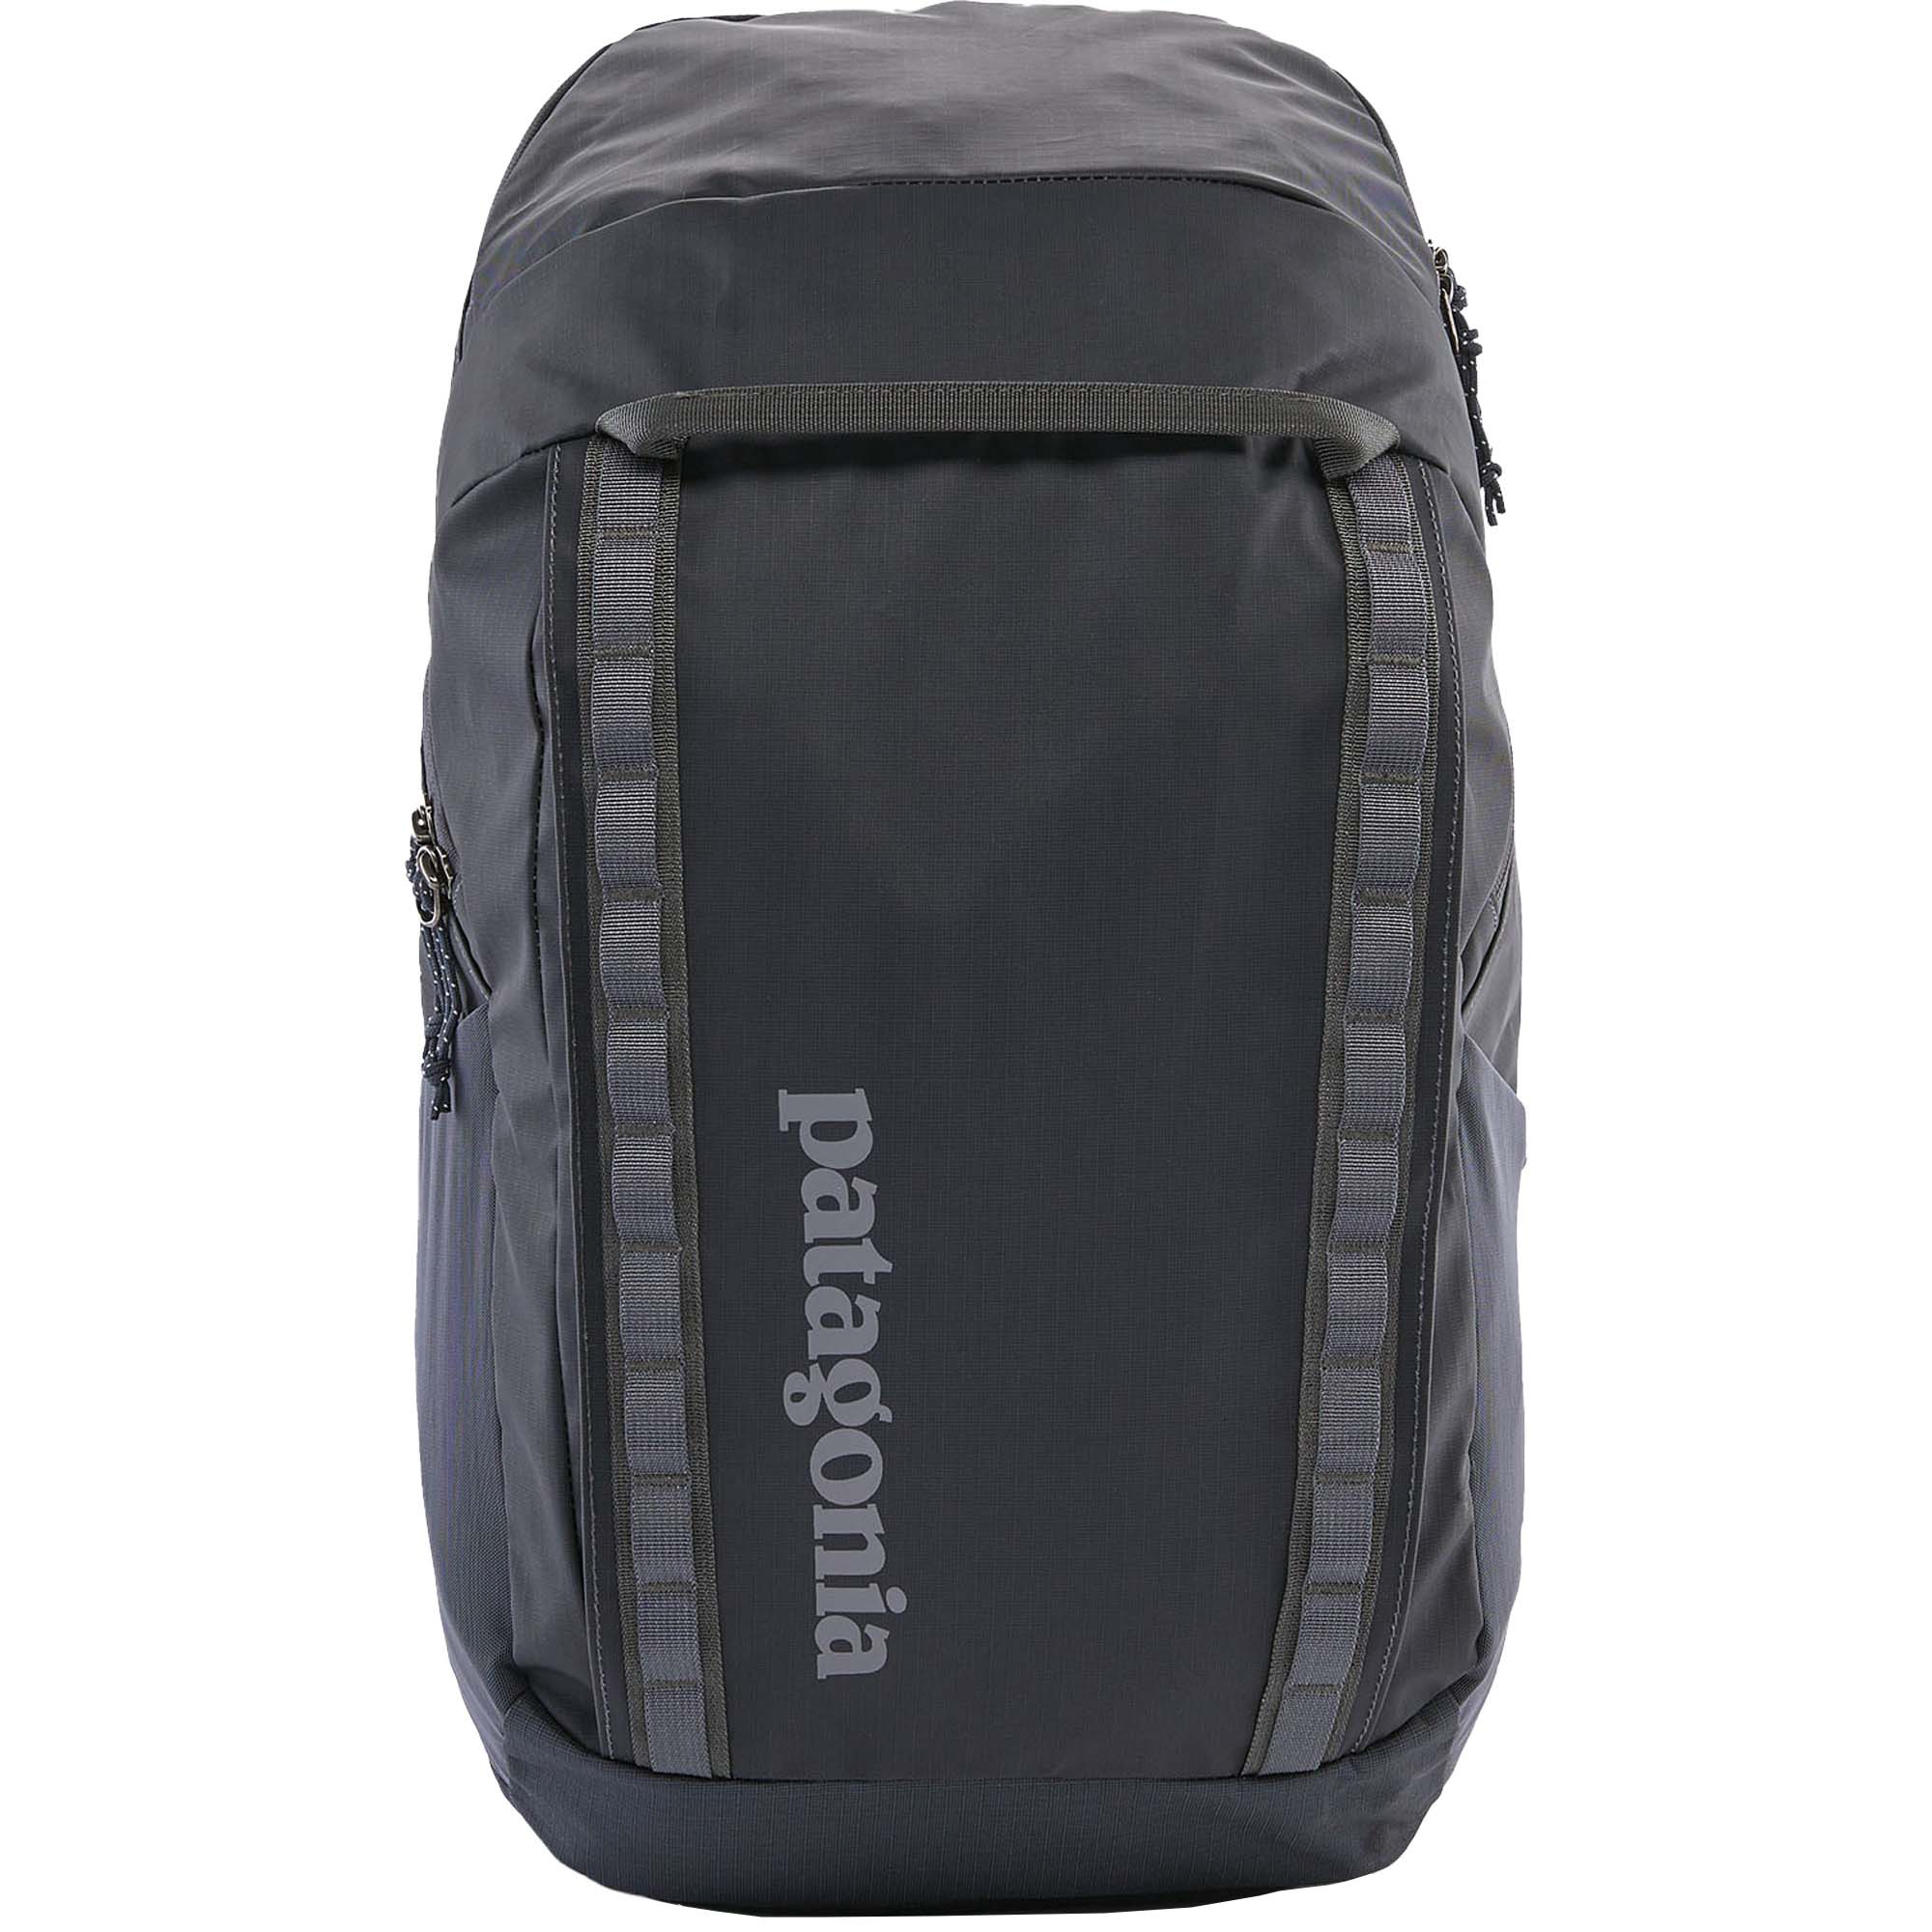 Patagonia Black Hole 32 Day Pack/Backpack